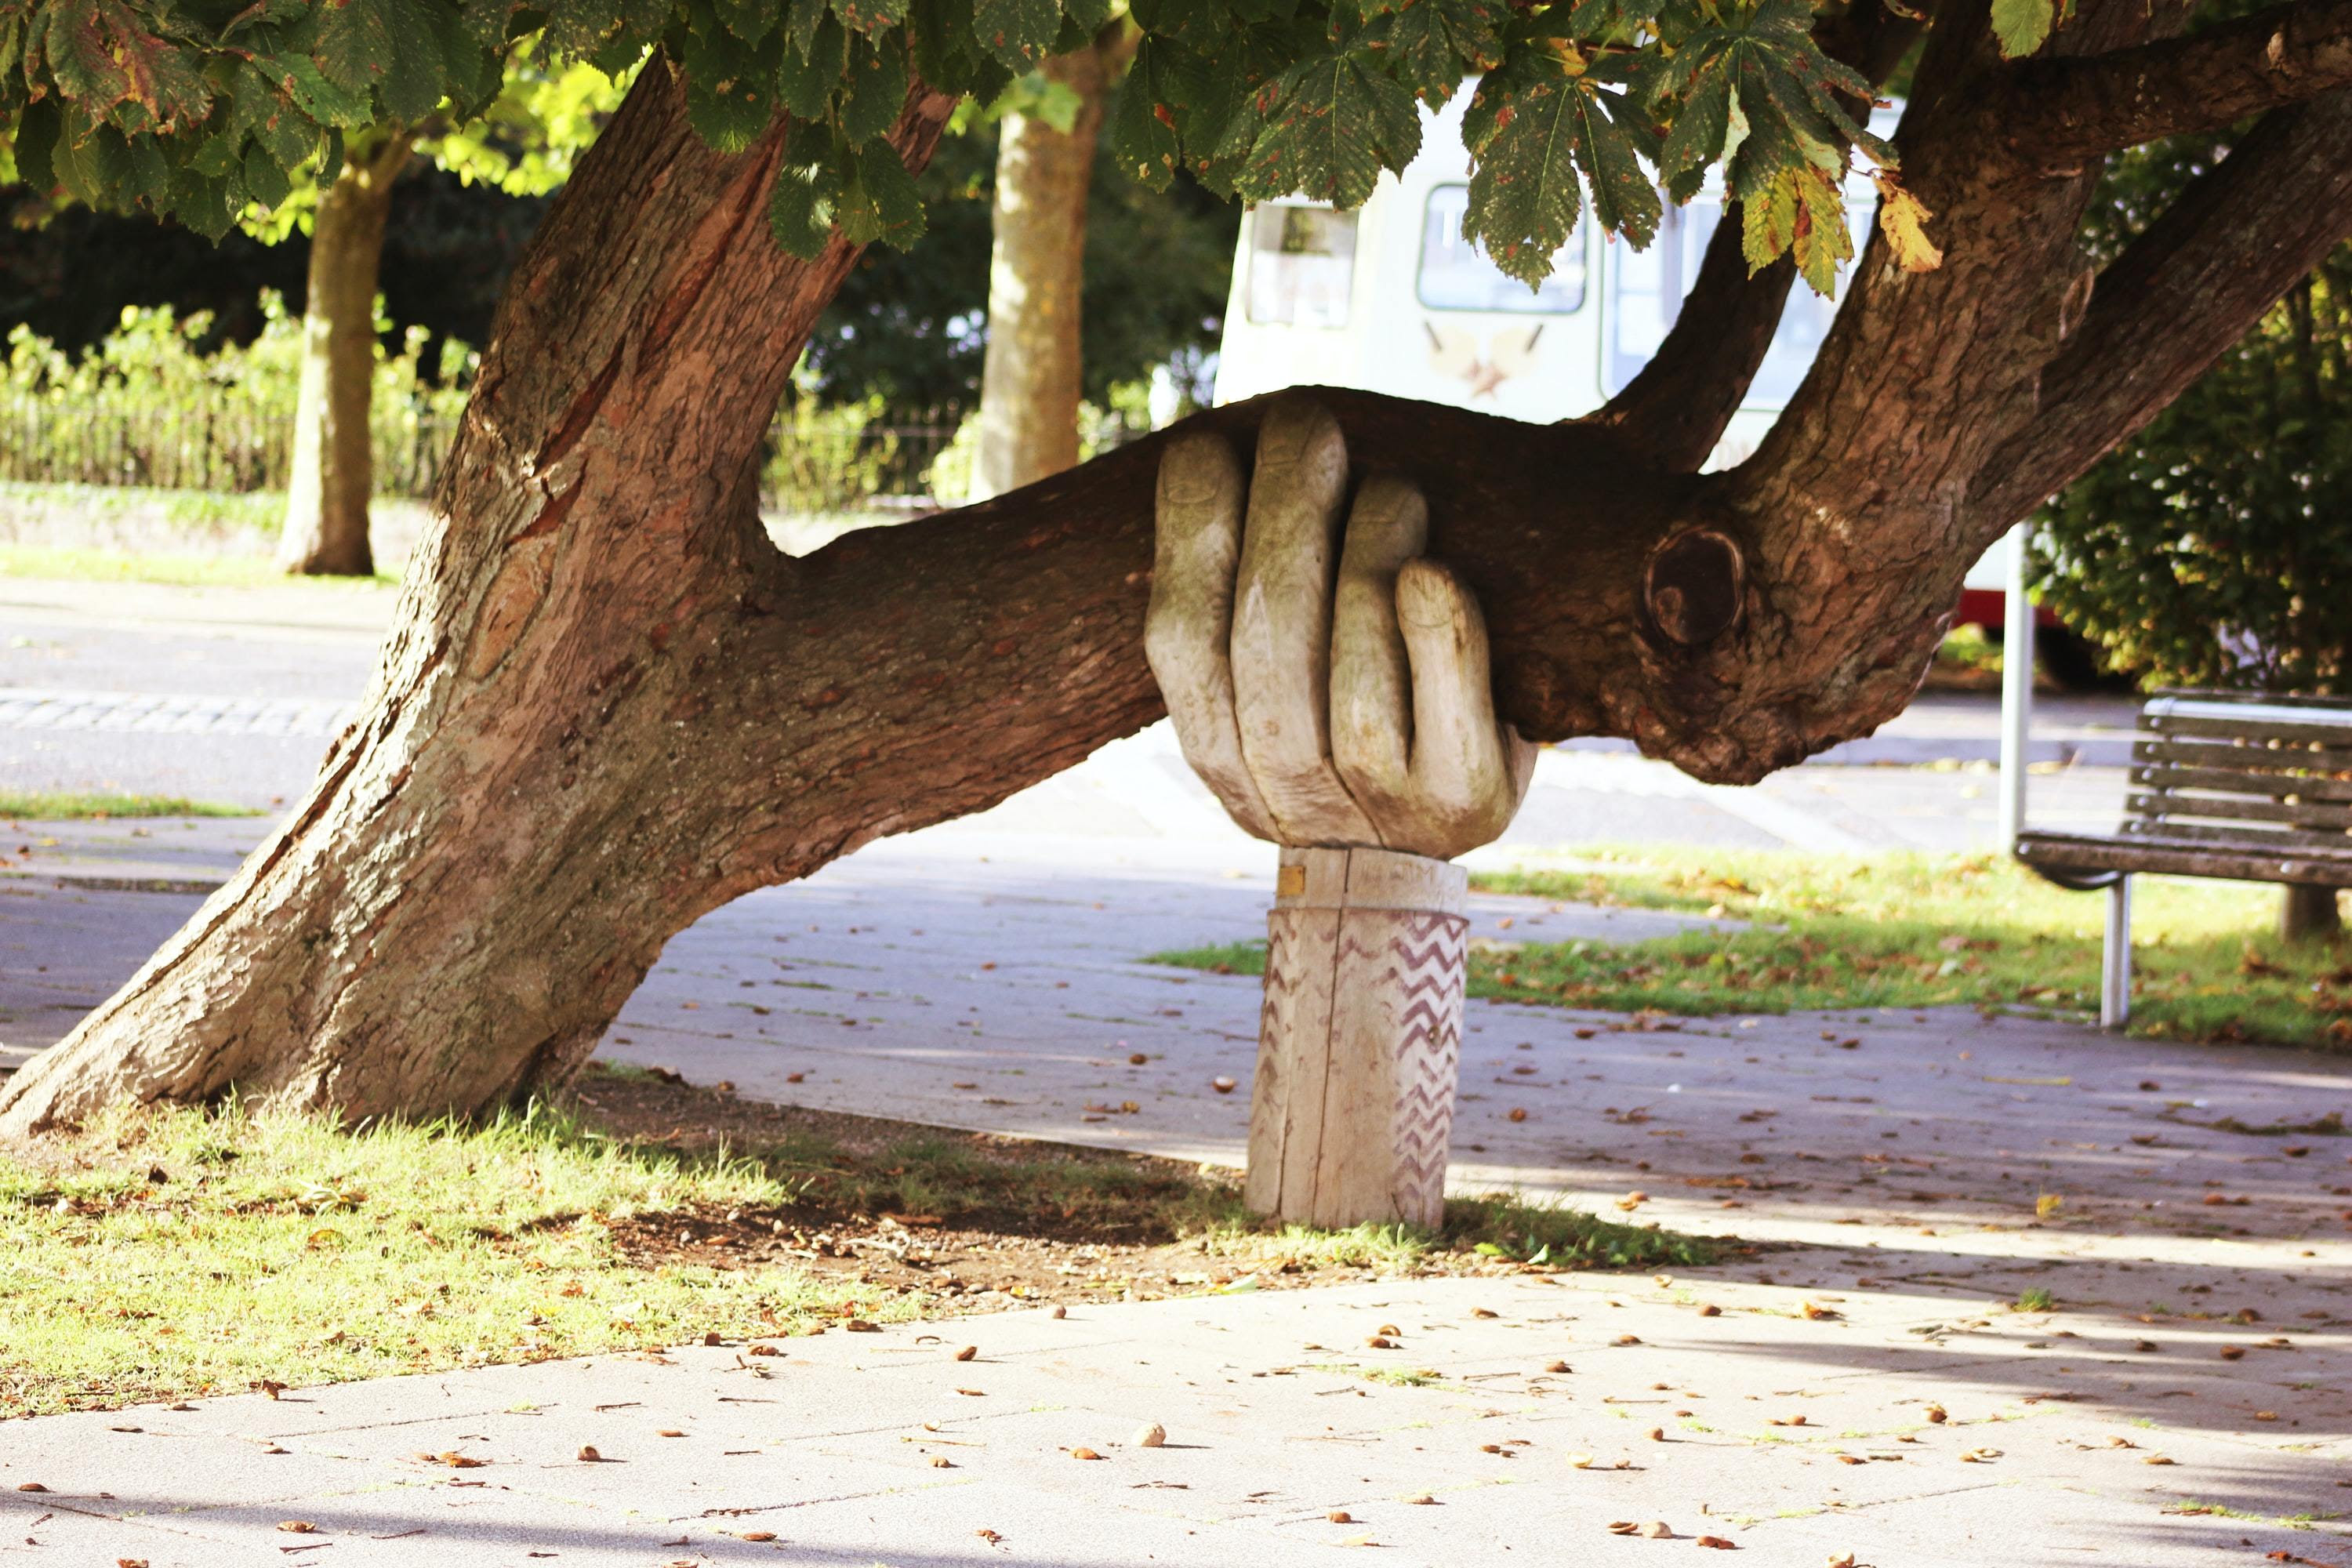 Photo of an old, leaning tree supported by a sculpture of a hand